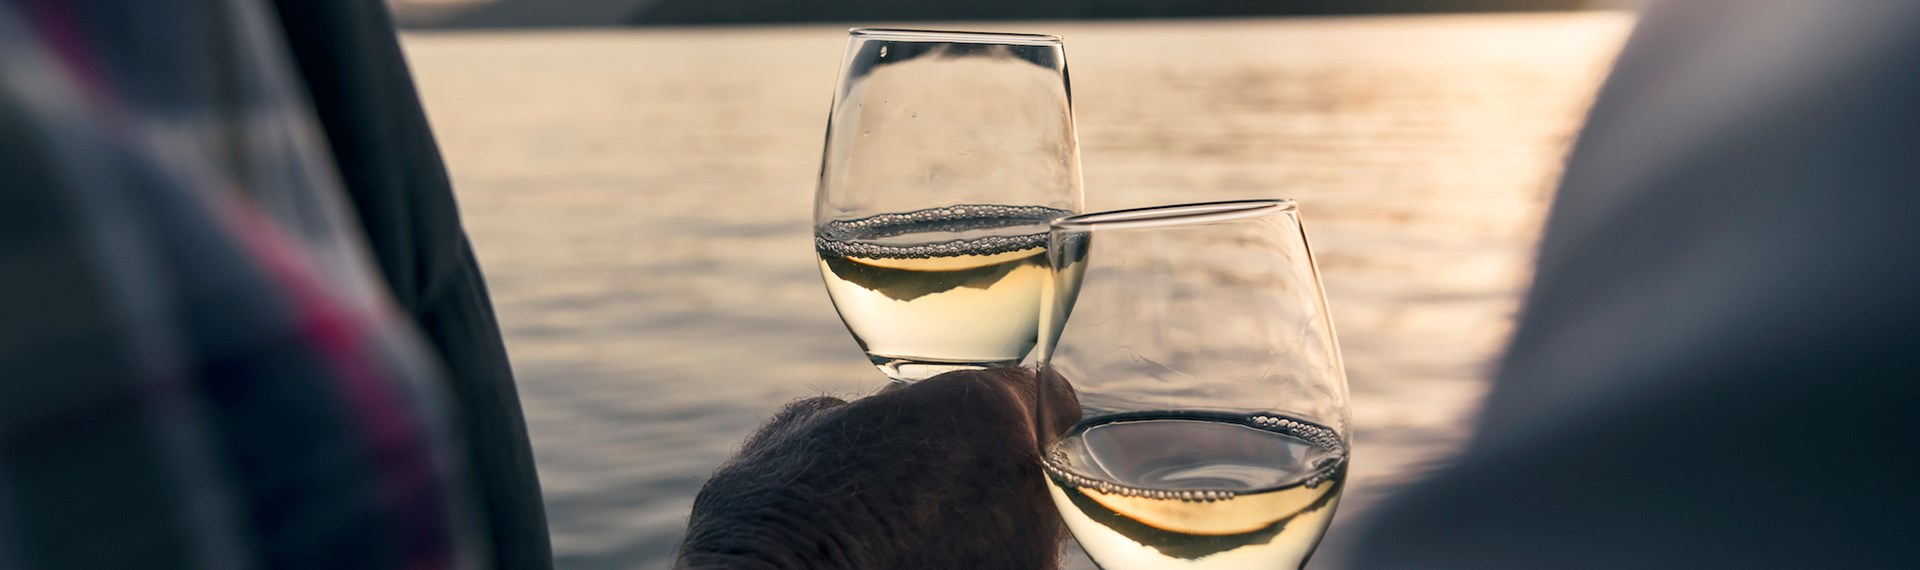 Close up of hands holding wine glasses with the Marlborough Sounds in the background at sunset - the top of New Zealand's South Island